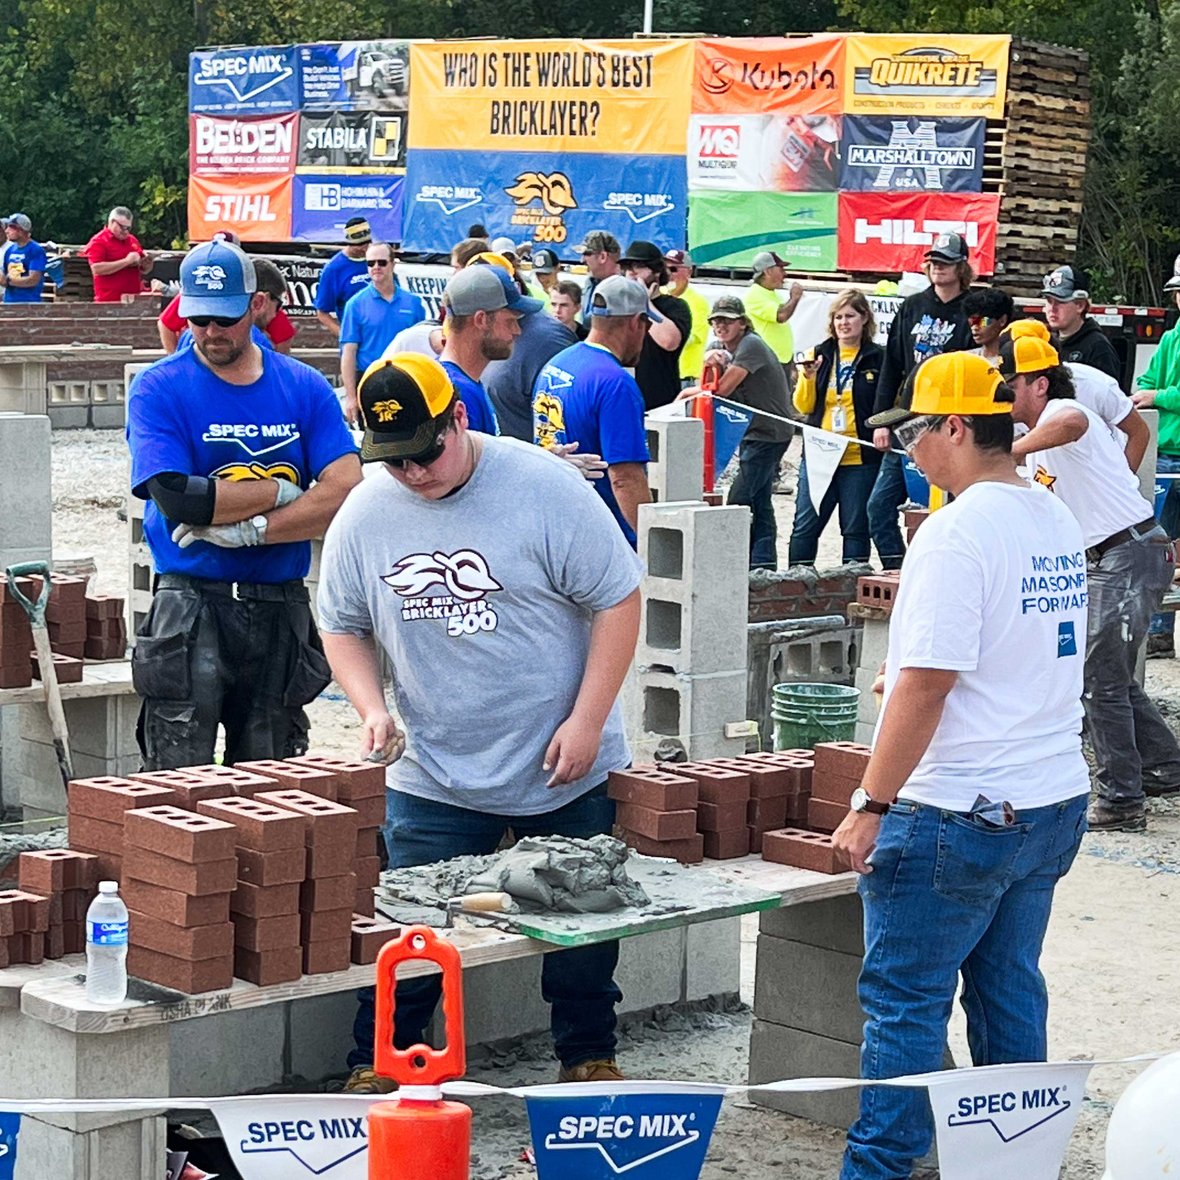 CD Smith Construction and Fond du Lac High Hunter Habersat Competing at SPEC MIX JR Bricklayer 500